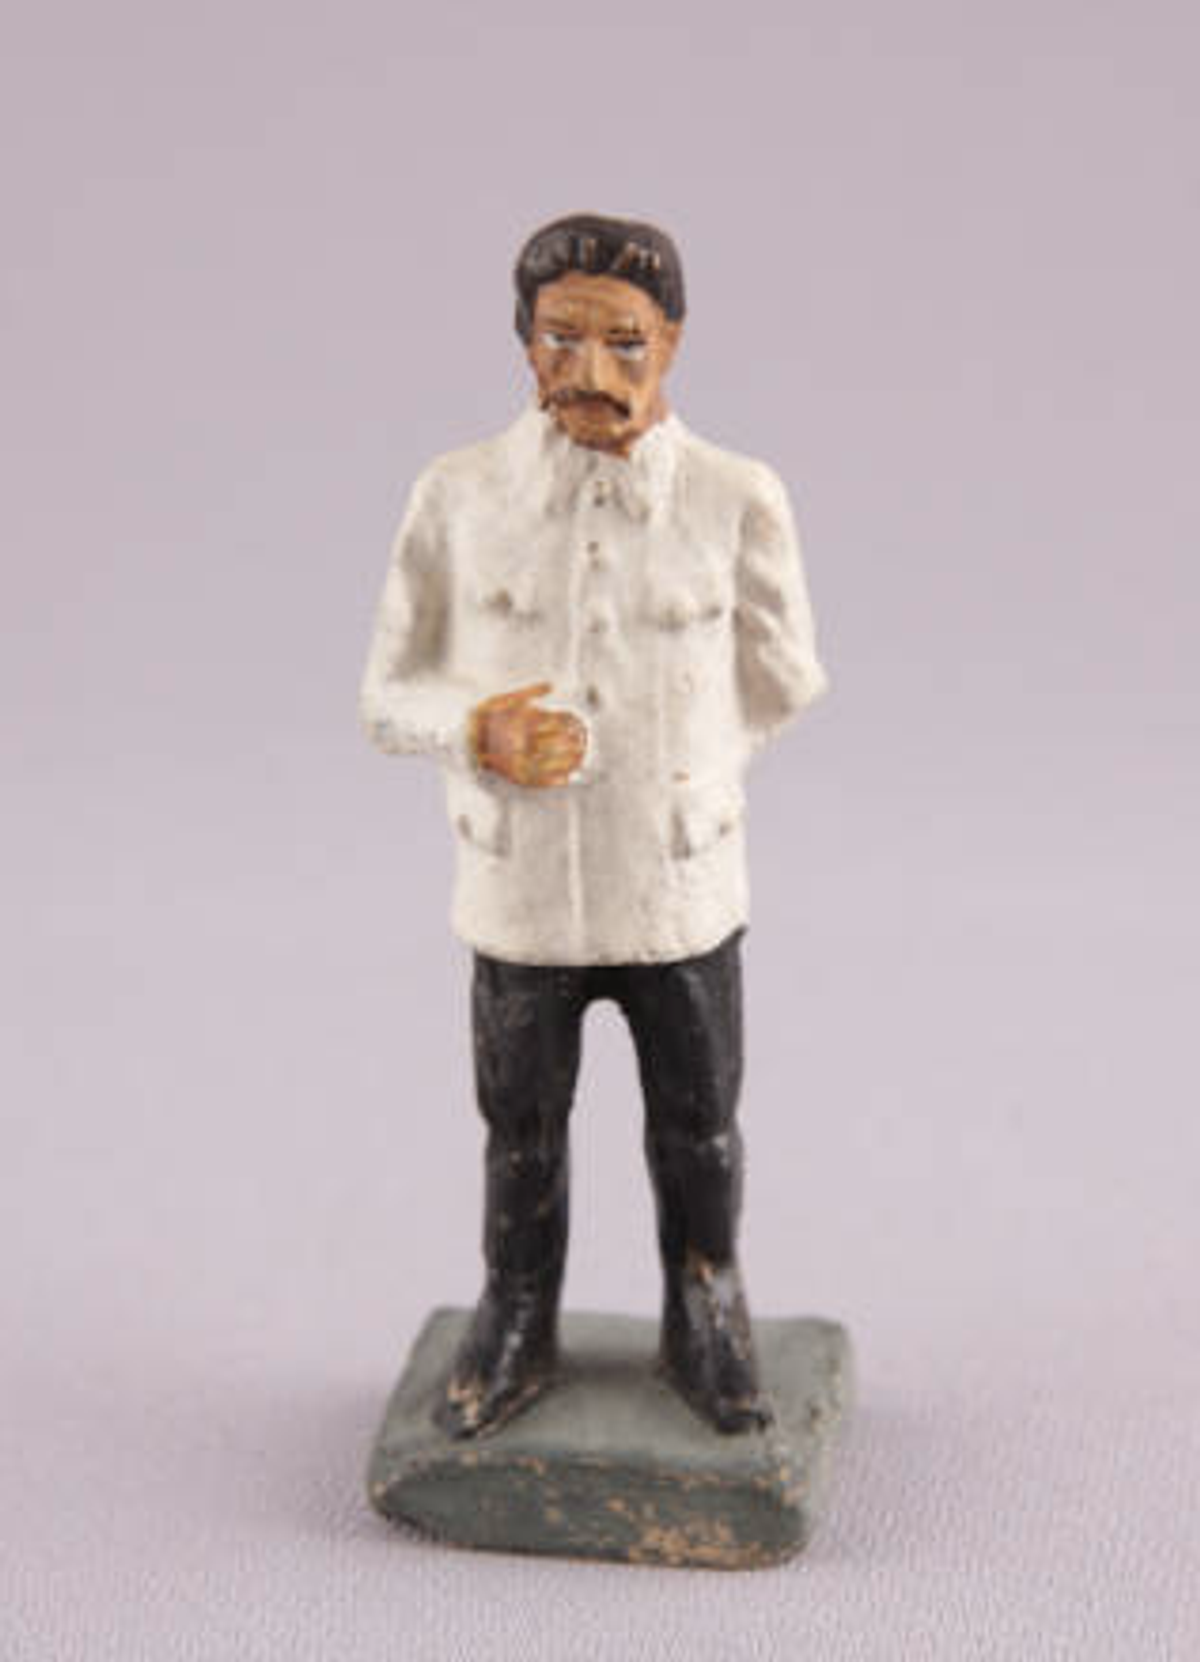 A molded figure of Joseph Stalin, part of a collection of Franklin D. Roosevelt memorabilia at Roosevelt University. (Illinois Digital Archives)